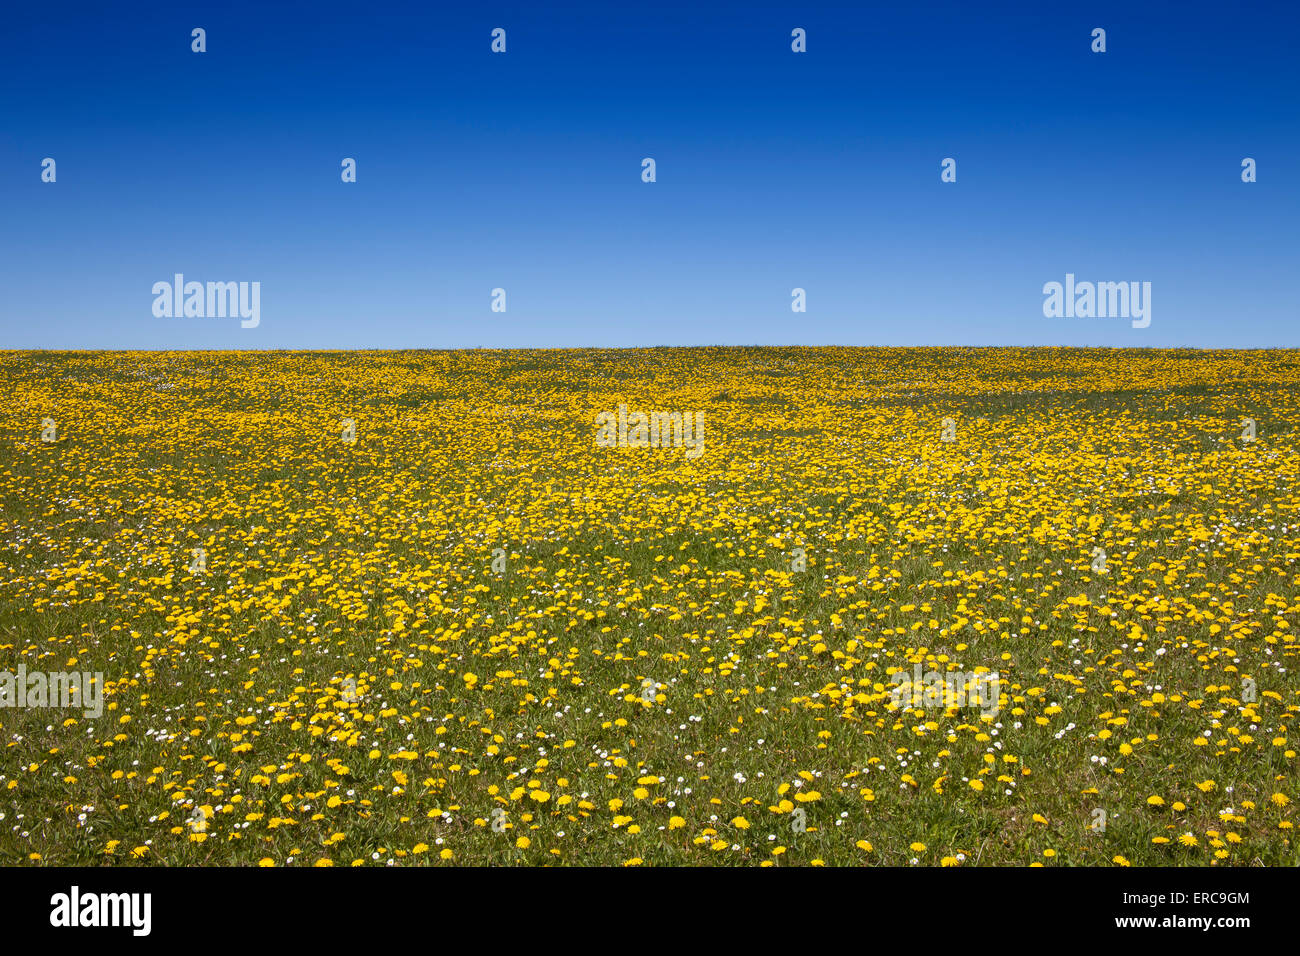 Meadow with dandelions (Taraxacum officinale) in spring, Sylt, Schleswig-Holstein, Germany Stock Photo